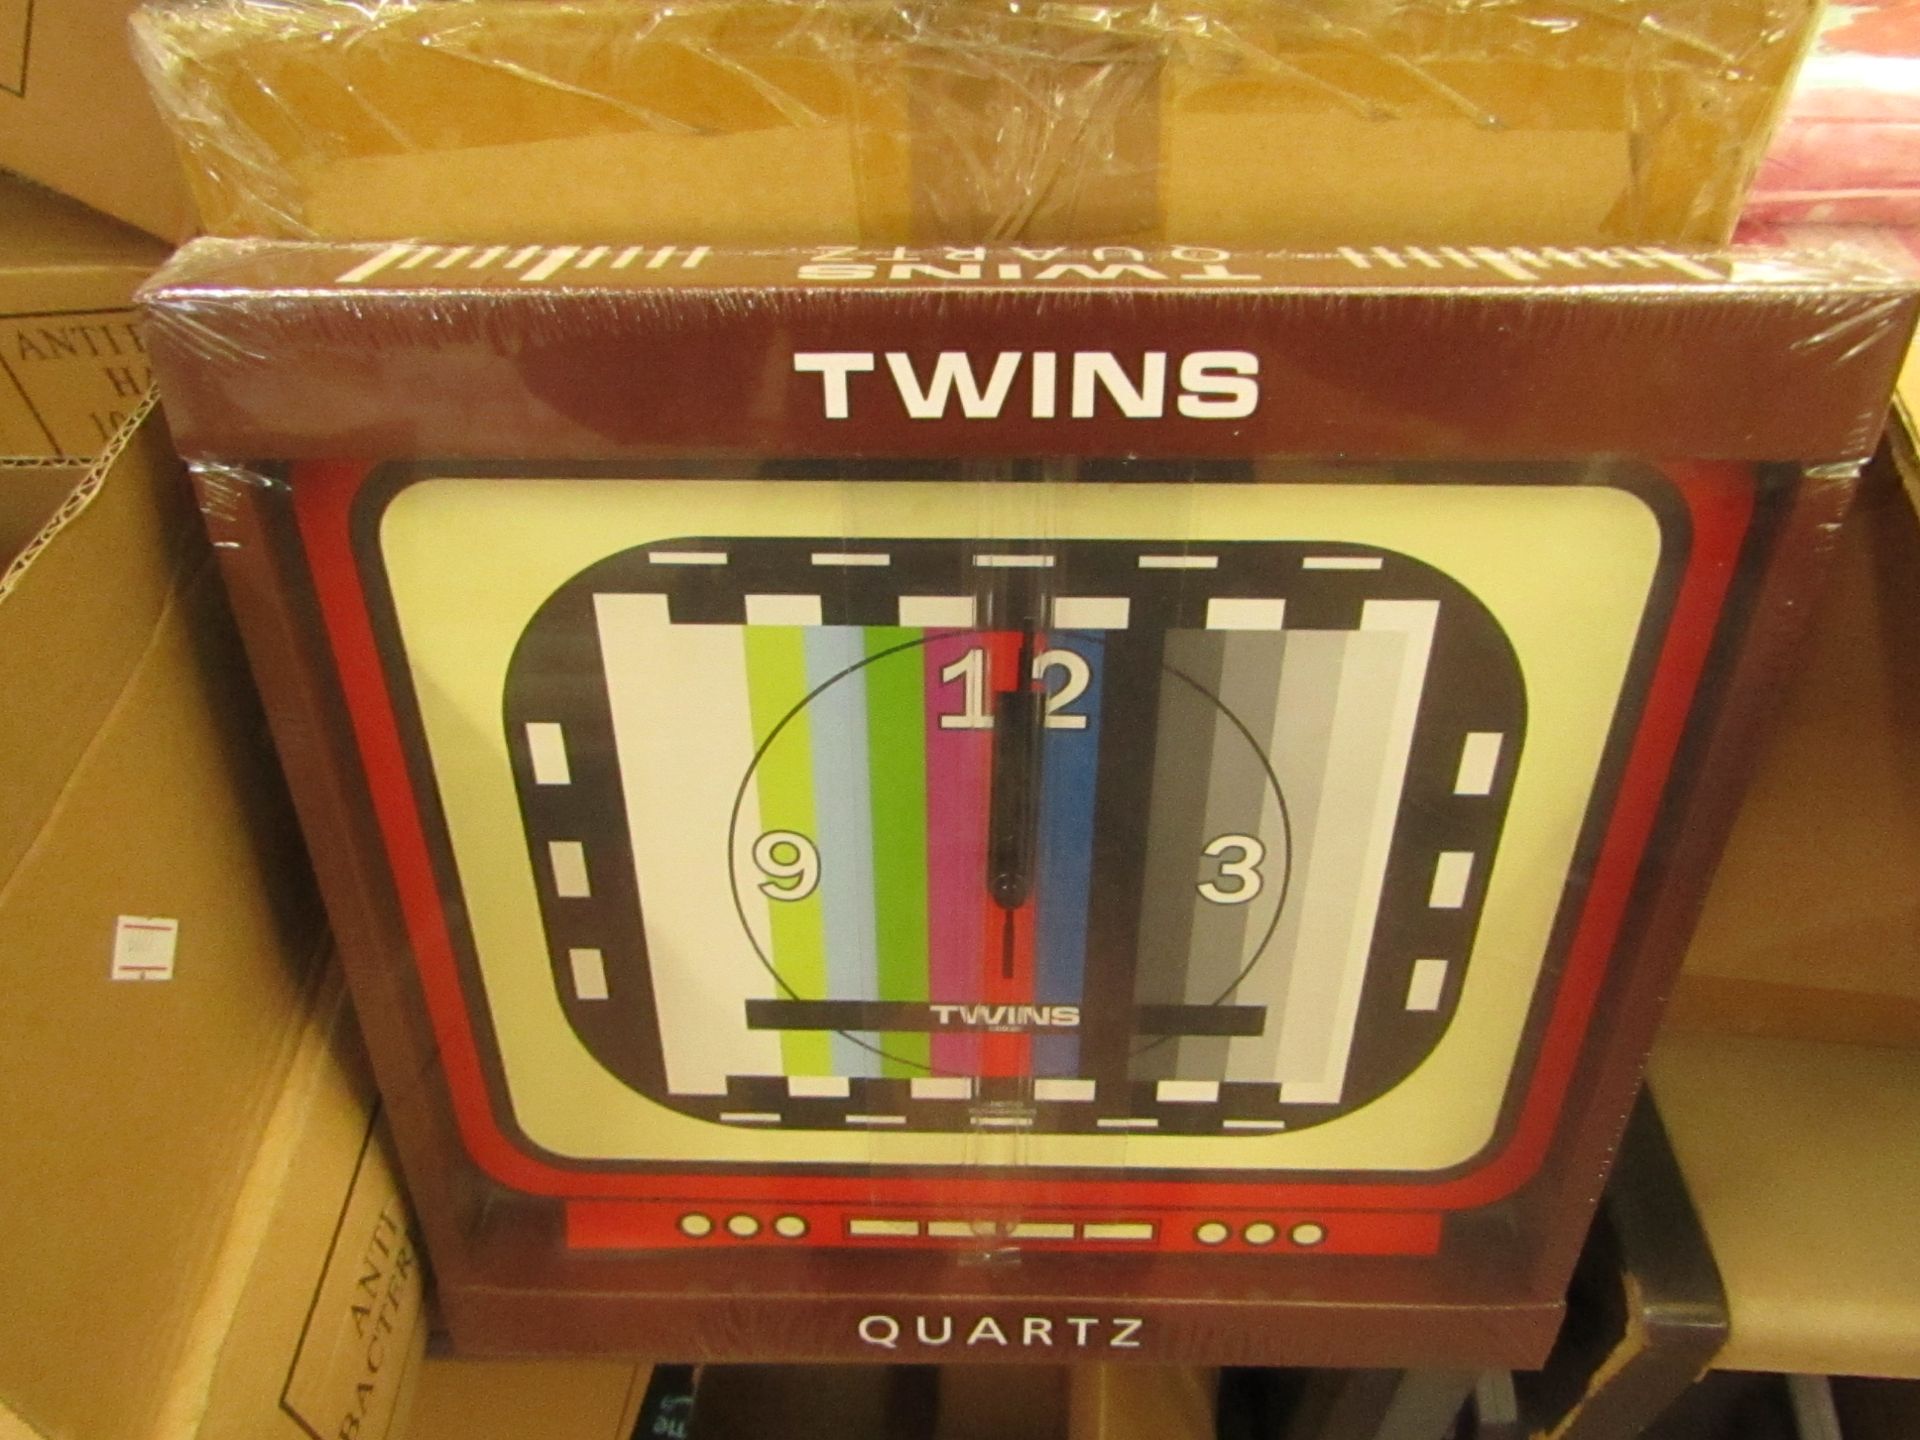 2 x Twins Quartz Wall Clocks new & packaged see image for design